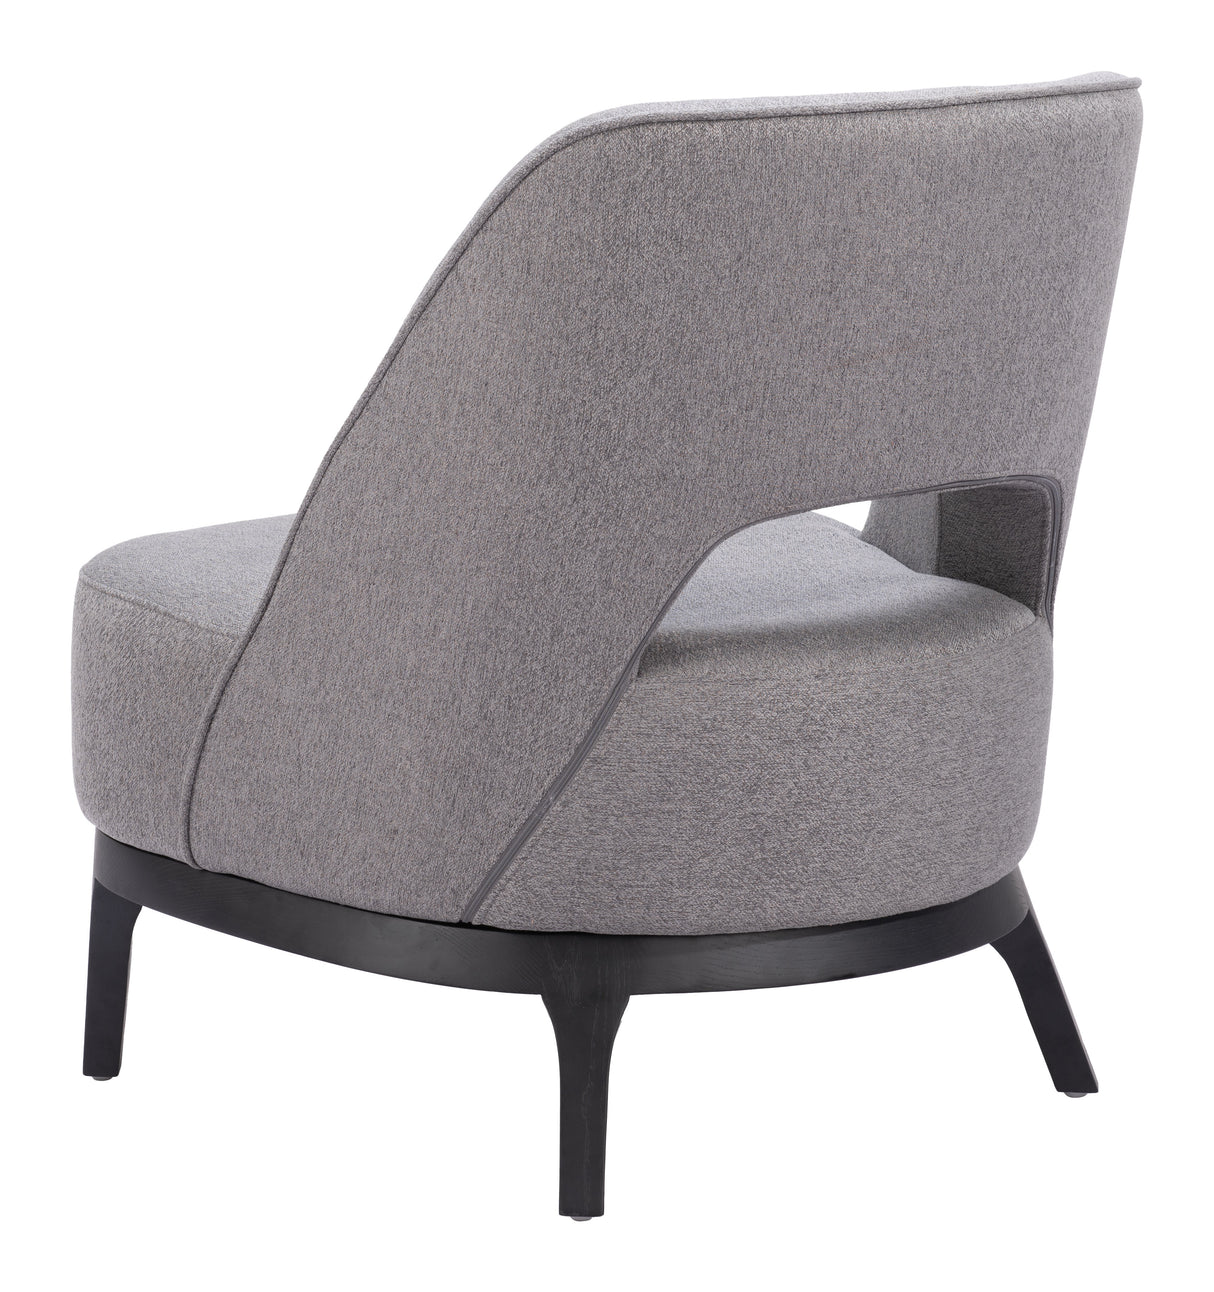 Mistley Accent Chair Gray